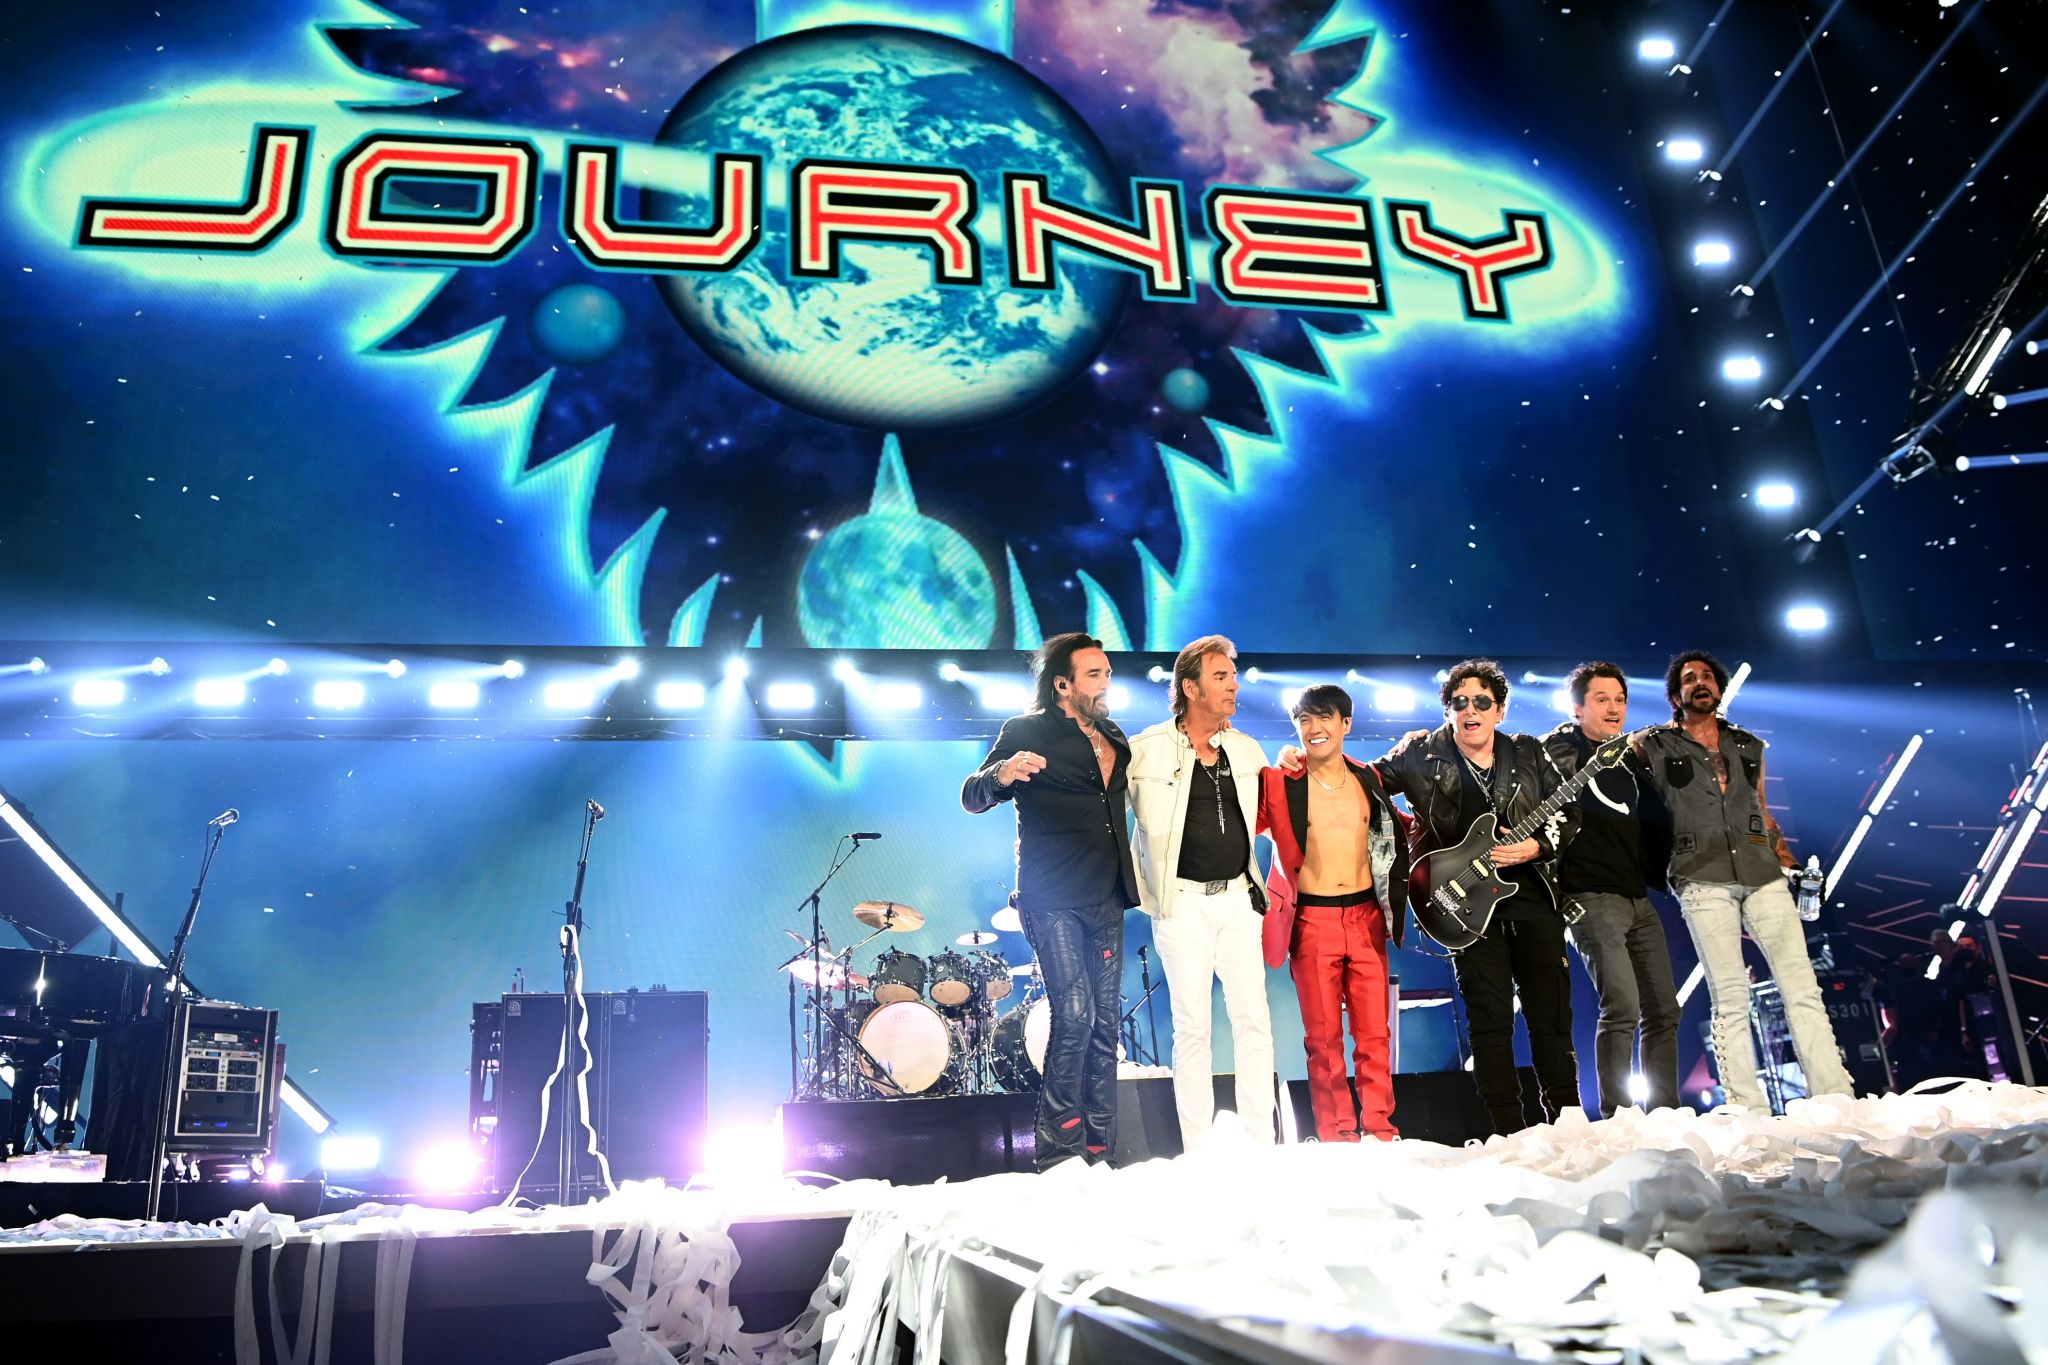 where is the band journey playing tonight